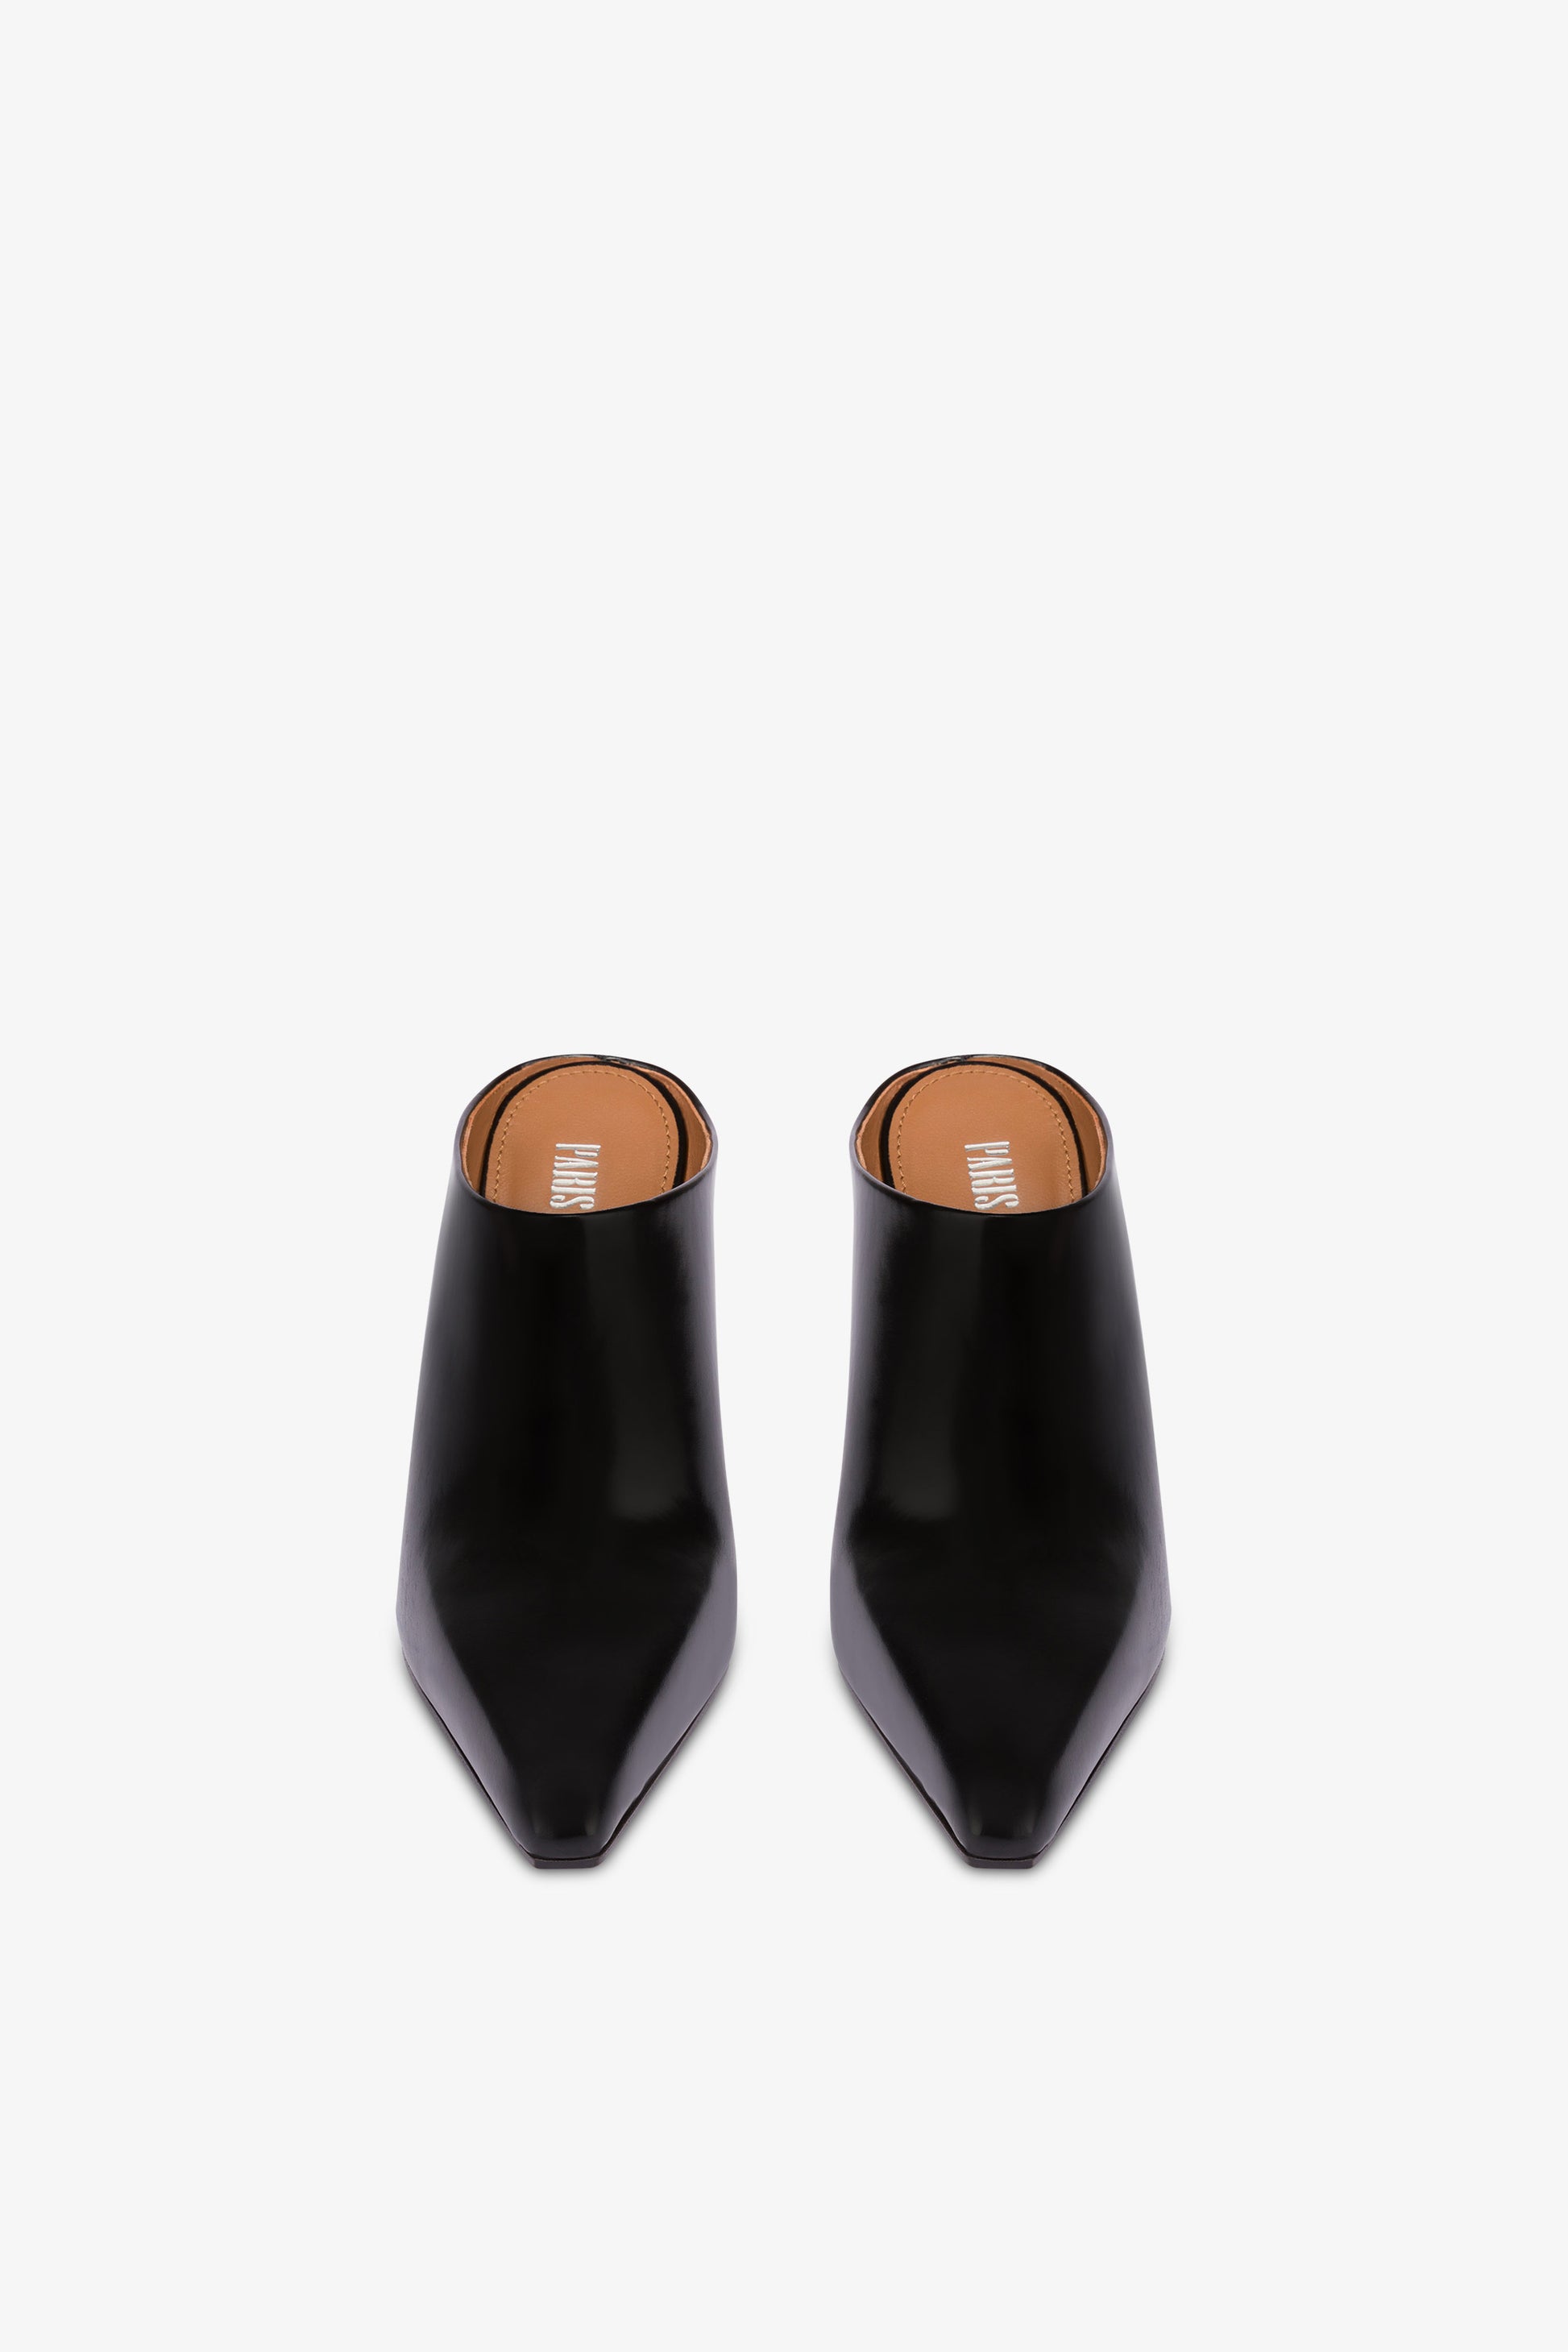 Long, pointed mule boots in soft black brushed leather